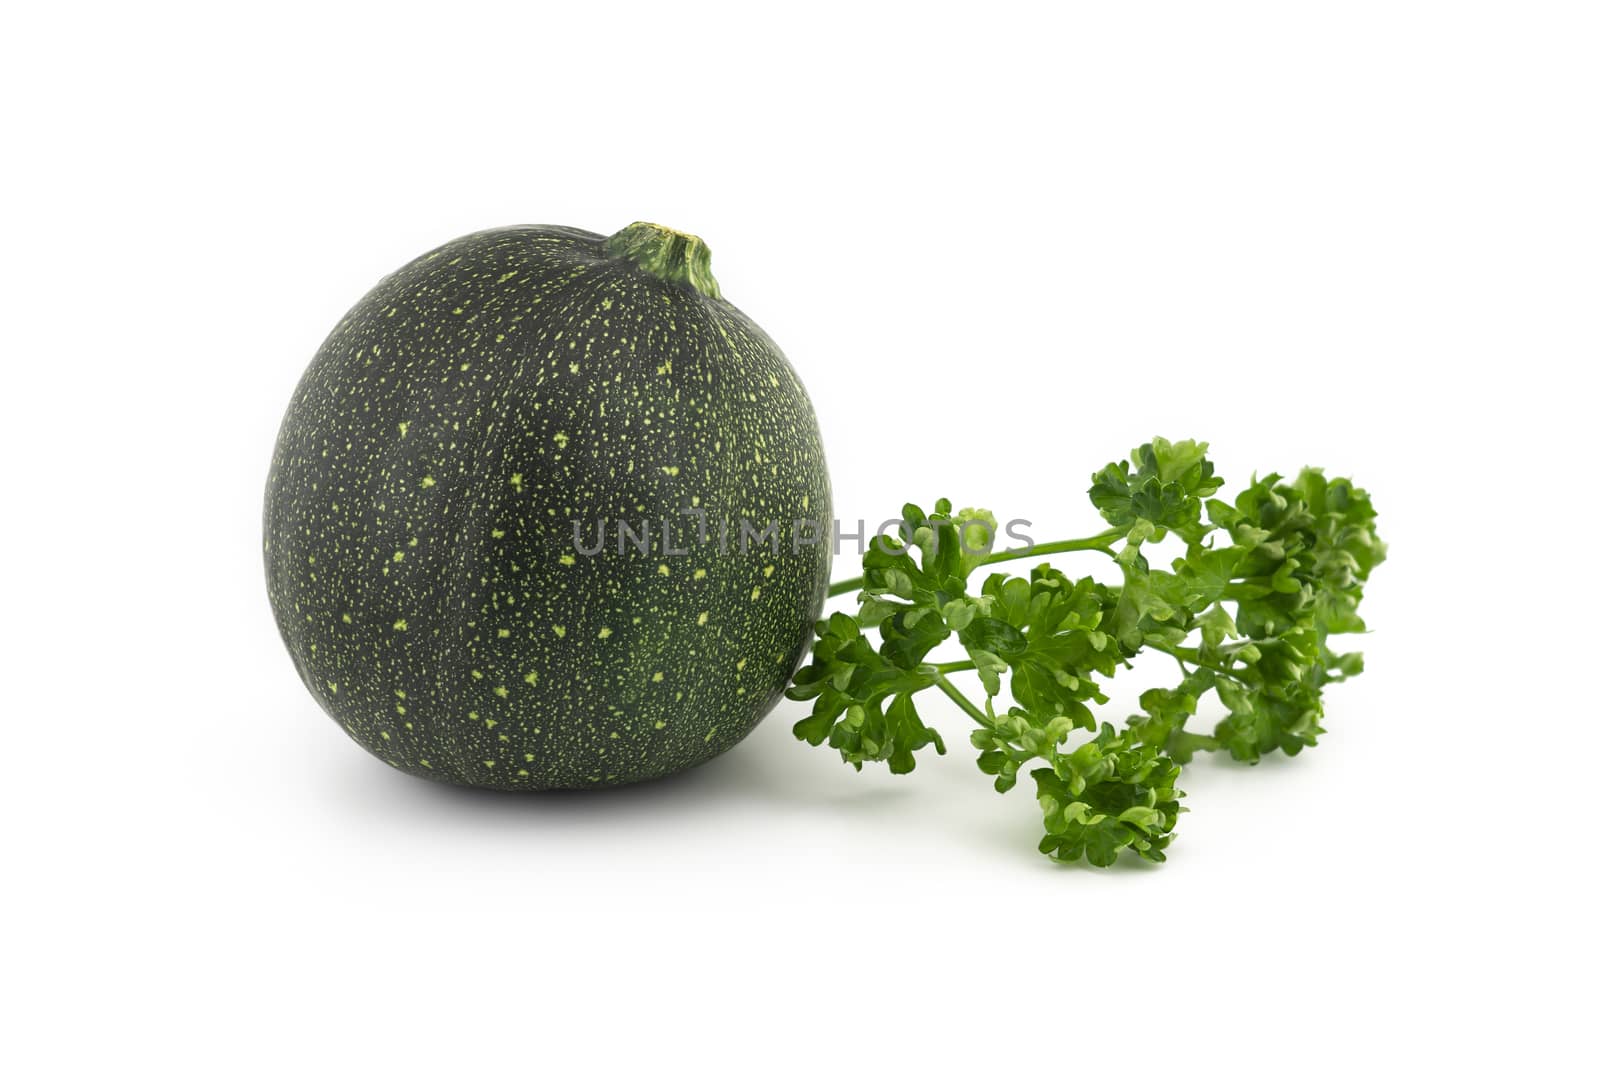 Green round courgette or zucchini and fresh parsley sprigs isolated on white background